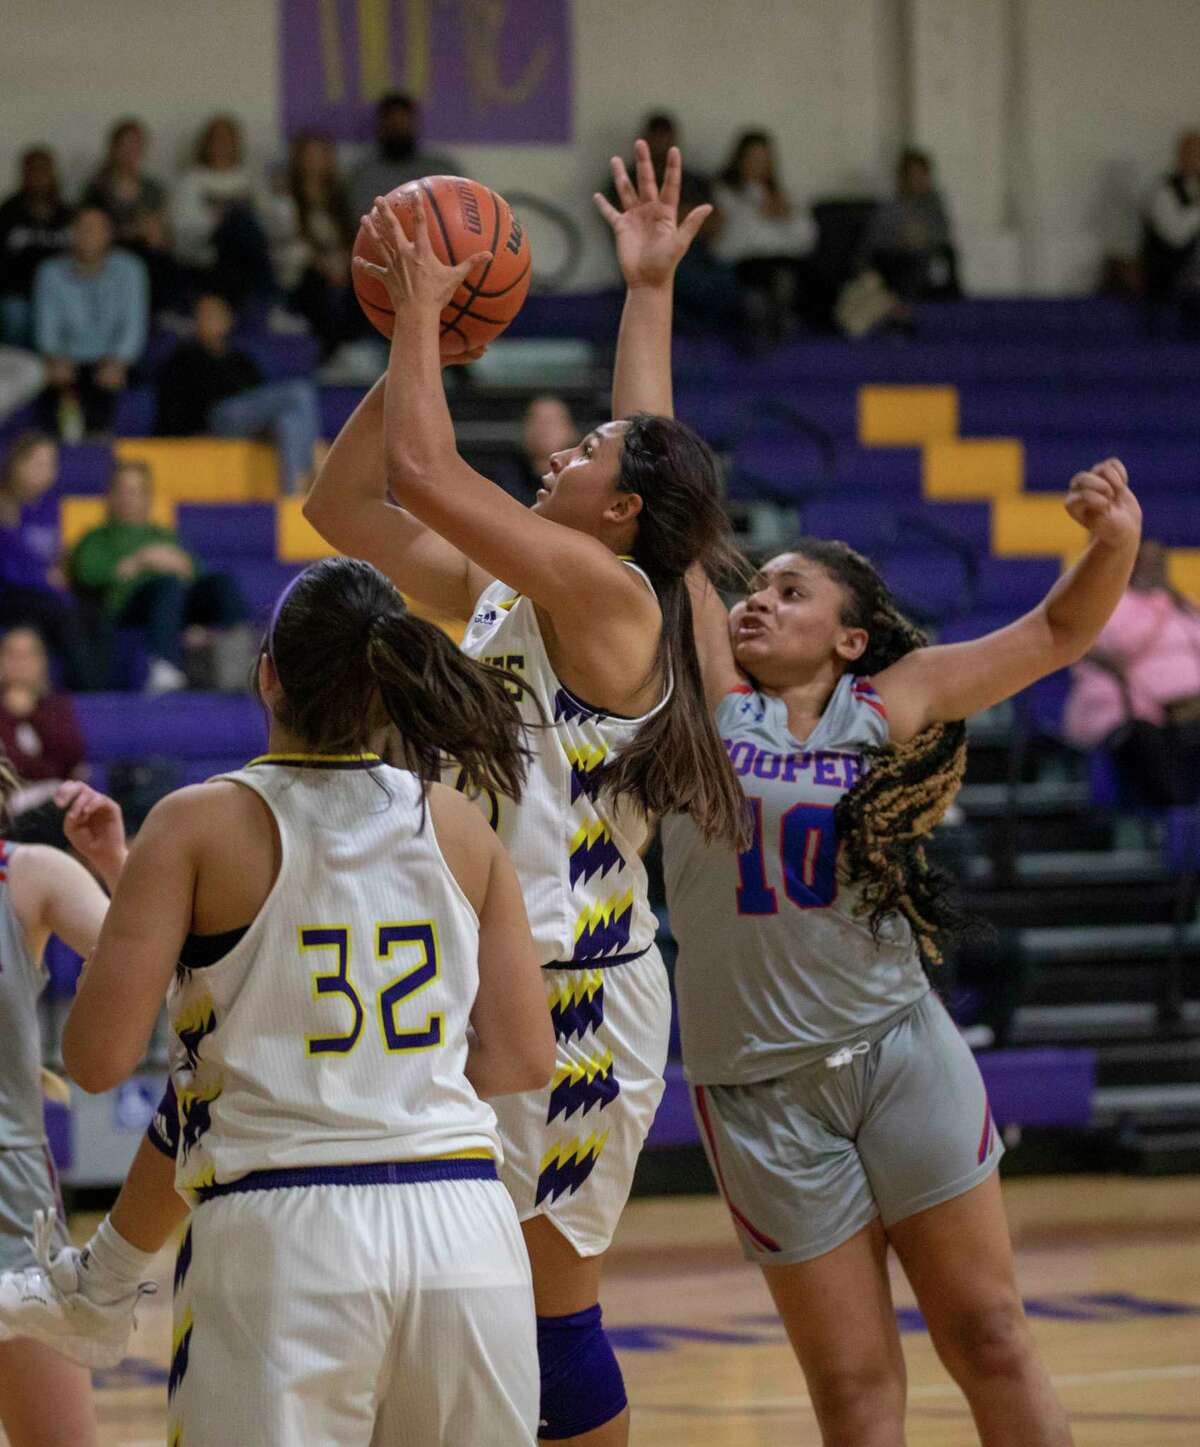 Midland High’s Noemi Arciga shoots the ball as Abilene Cooper’s Asjha Cherry attempts to block the shot Tuesday, Dec. 7, 2021 at Midland High School. Jacy Lewis/Reporter-Telegram